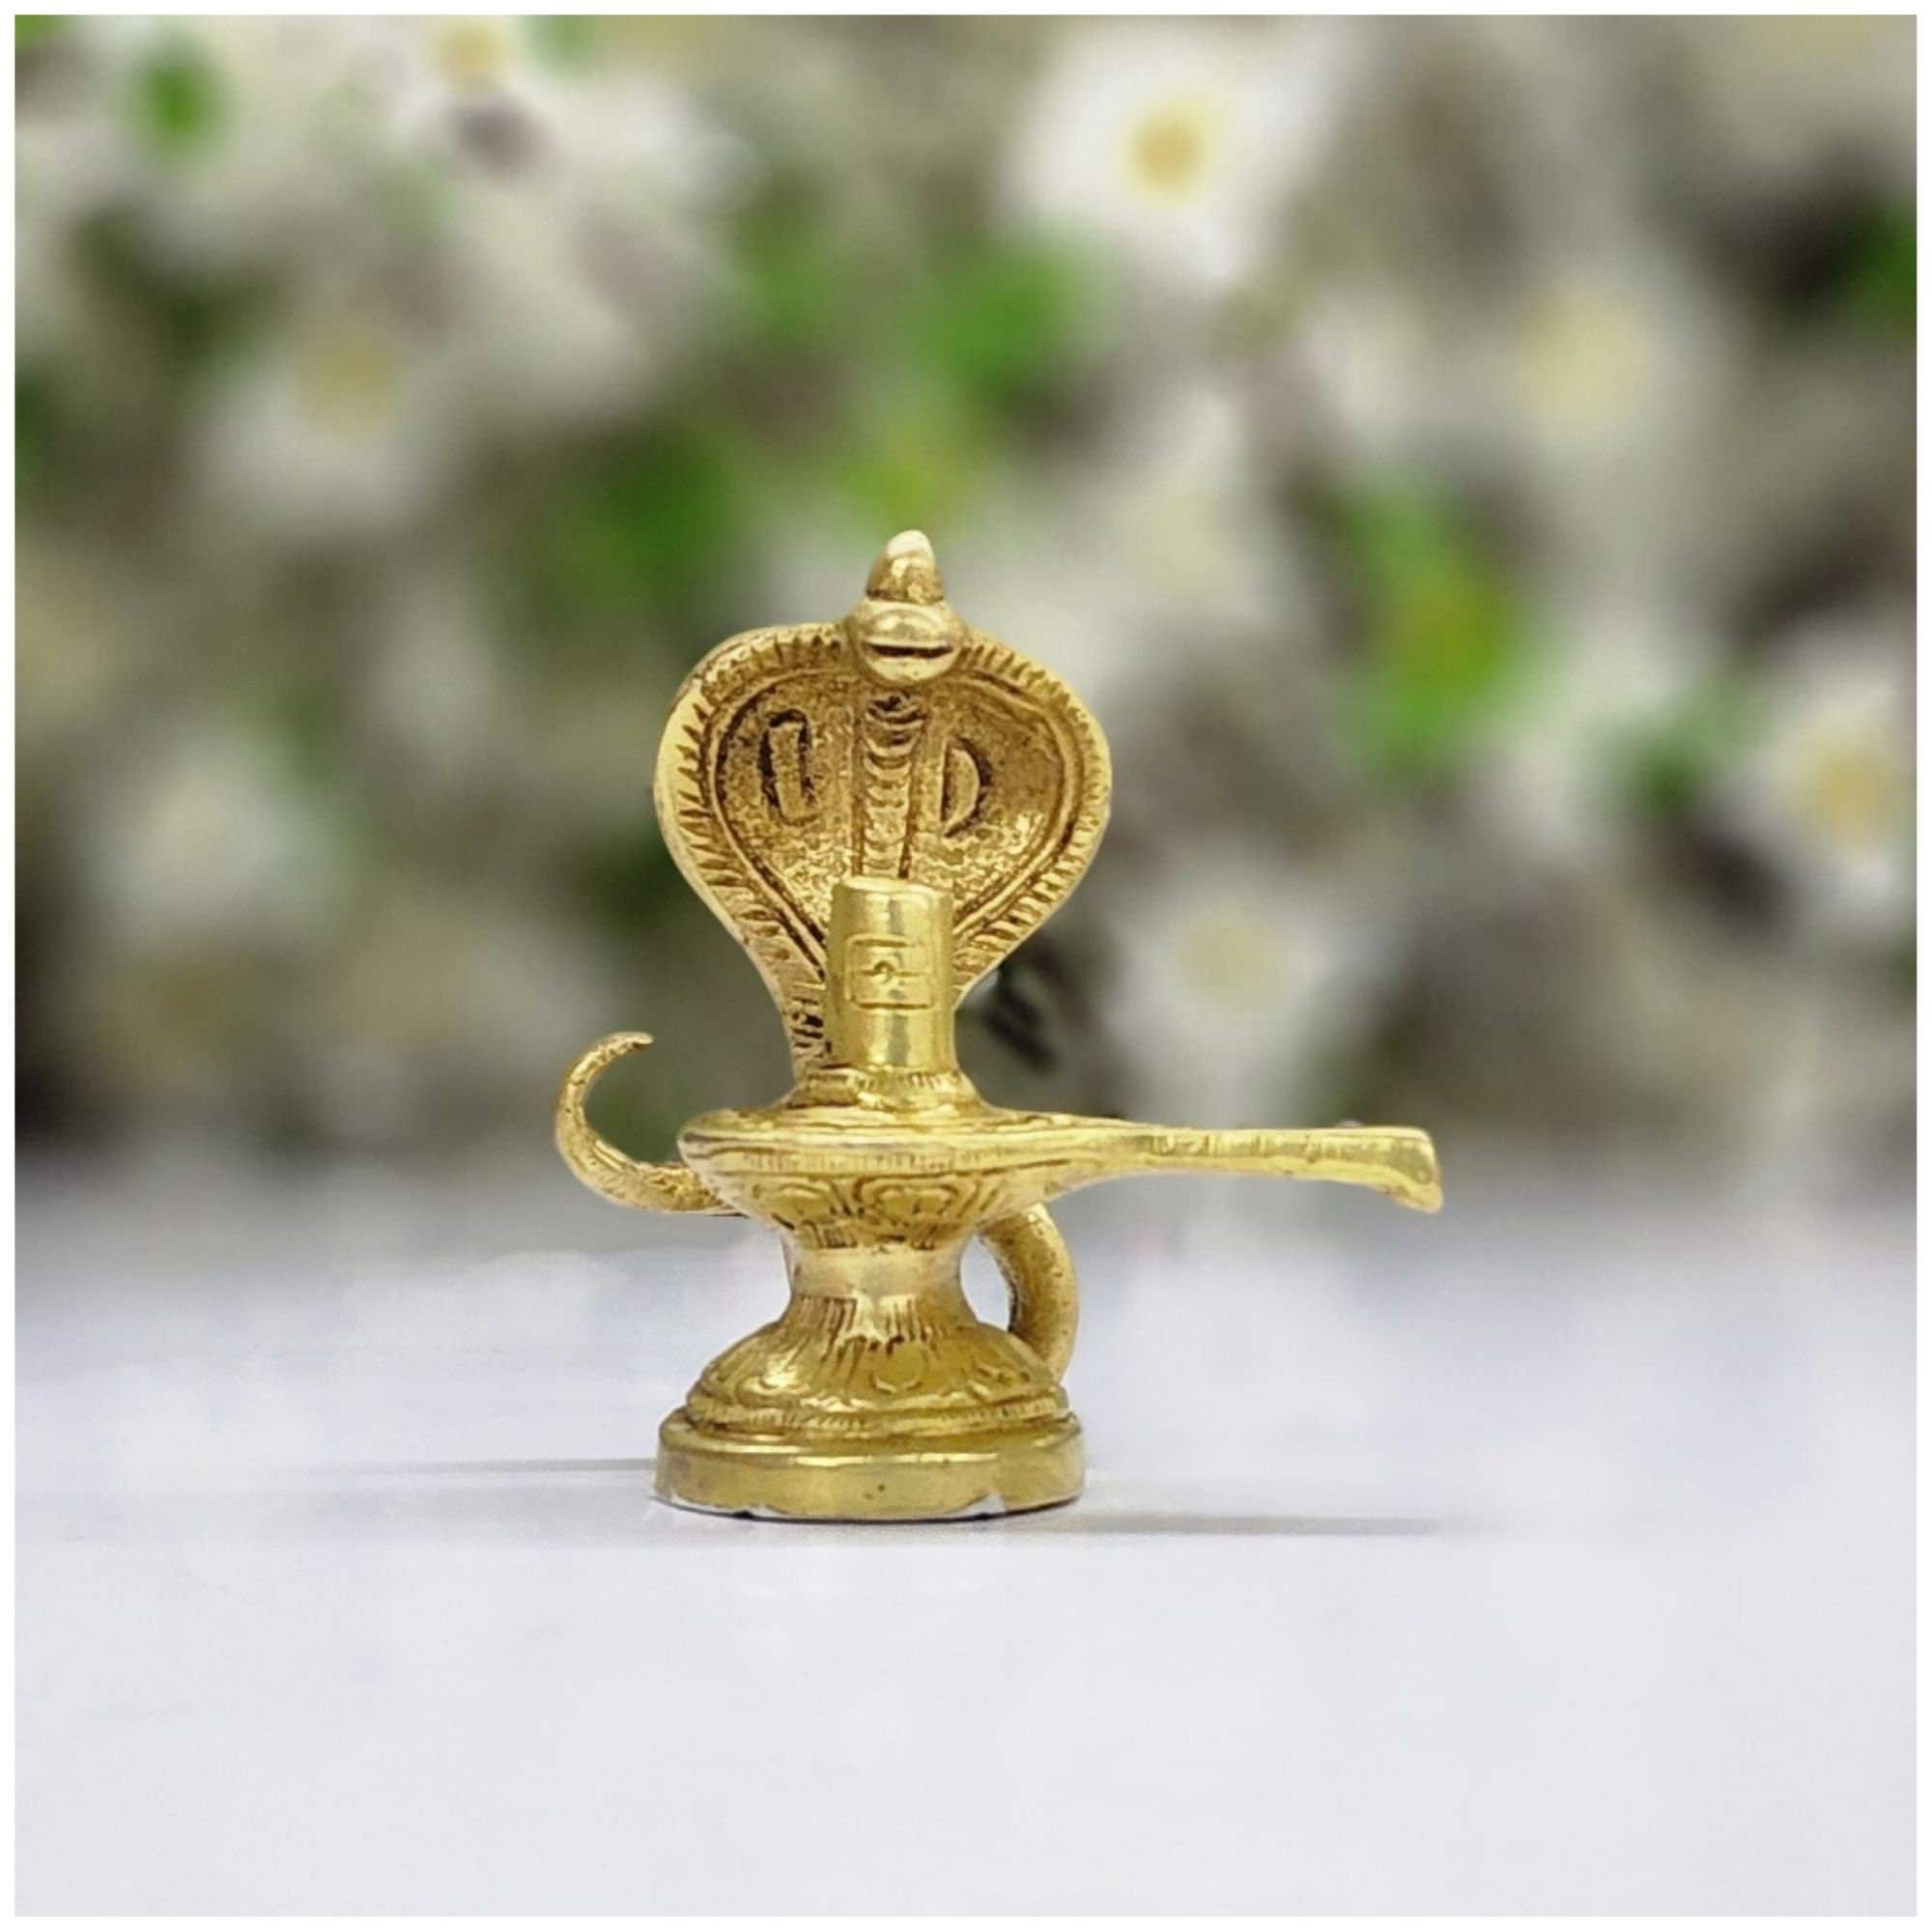 Hd Mata Ling Sex Video - Brass Shivling With Sheshnag Shiva Lingam Statue Lingam for - Etsy Norway